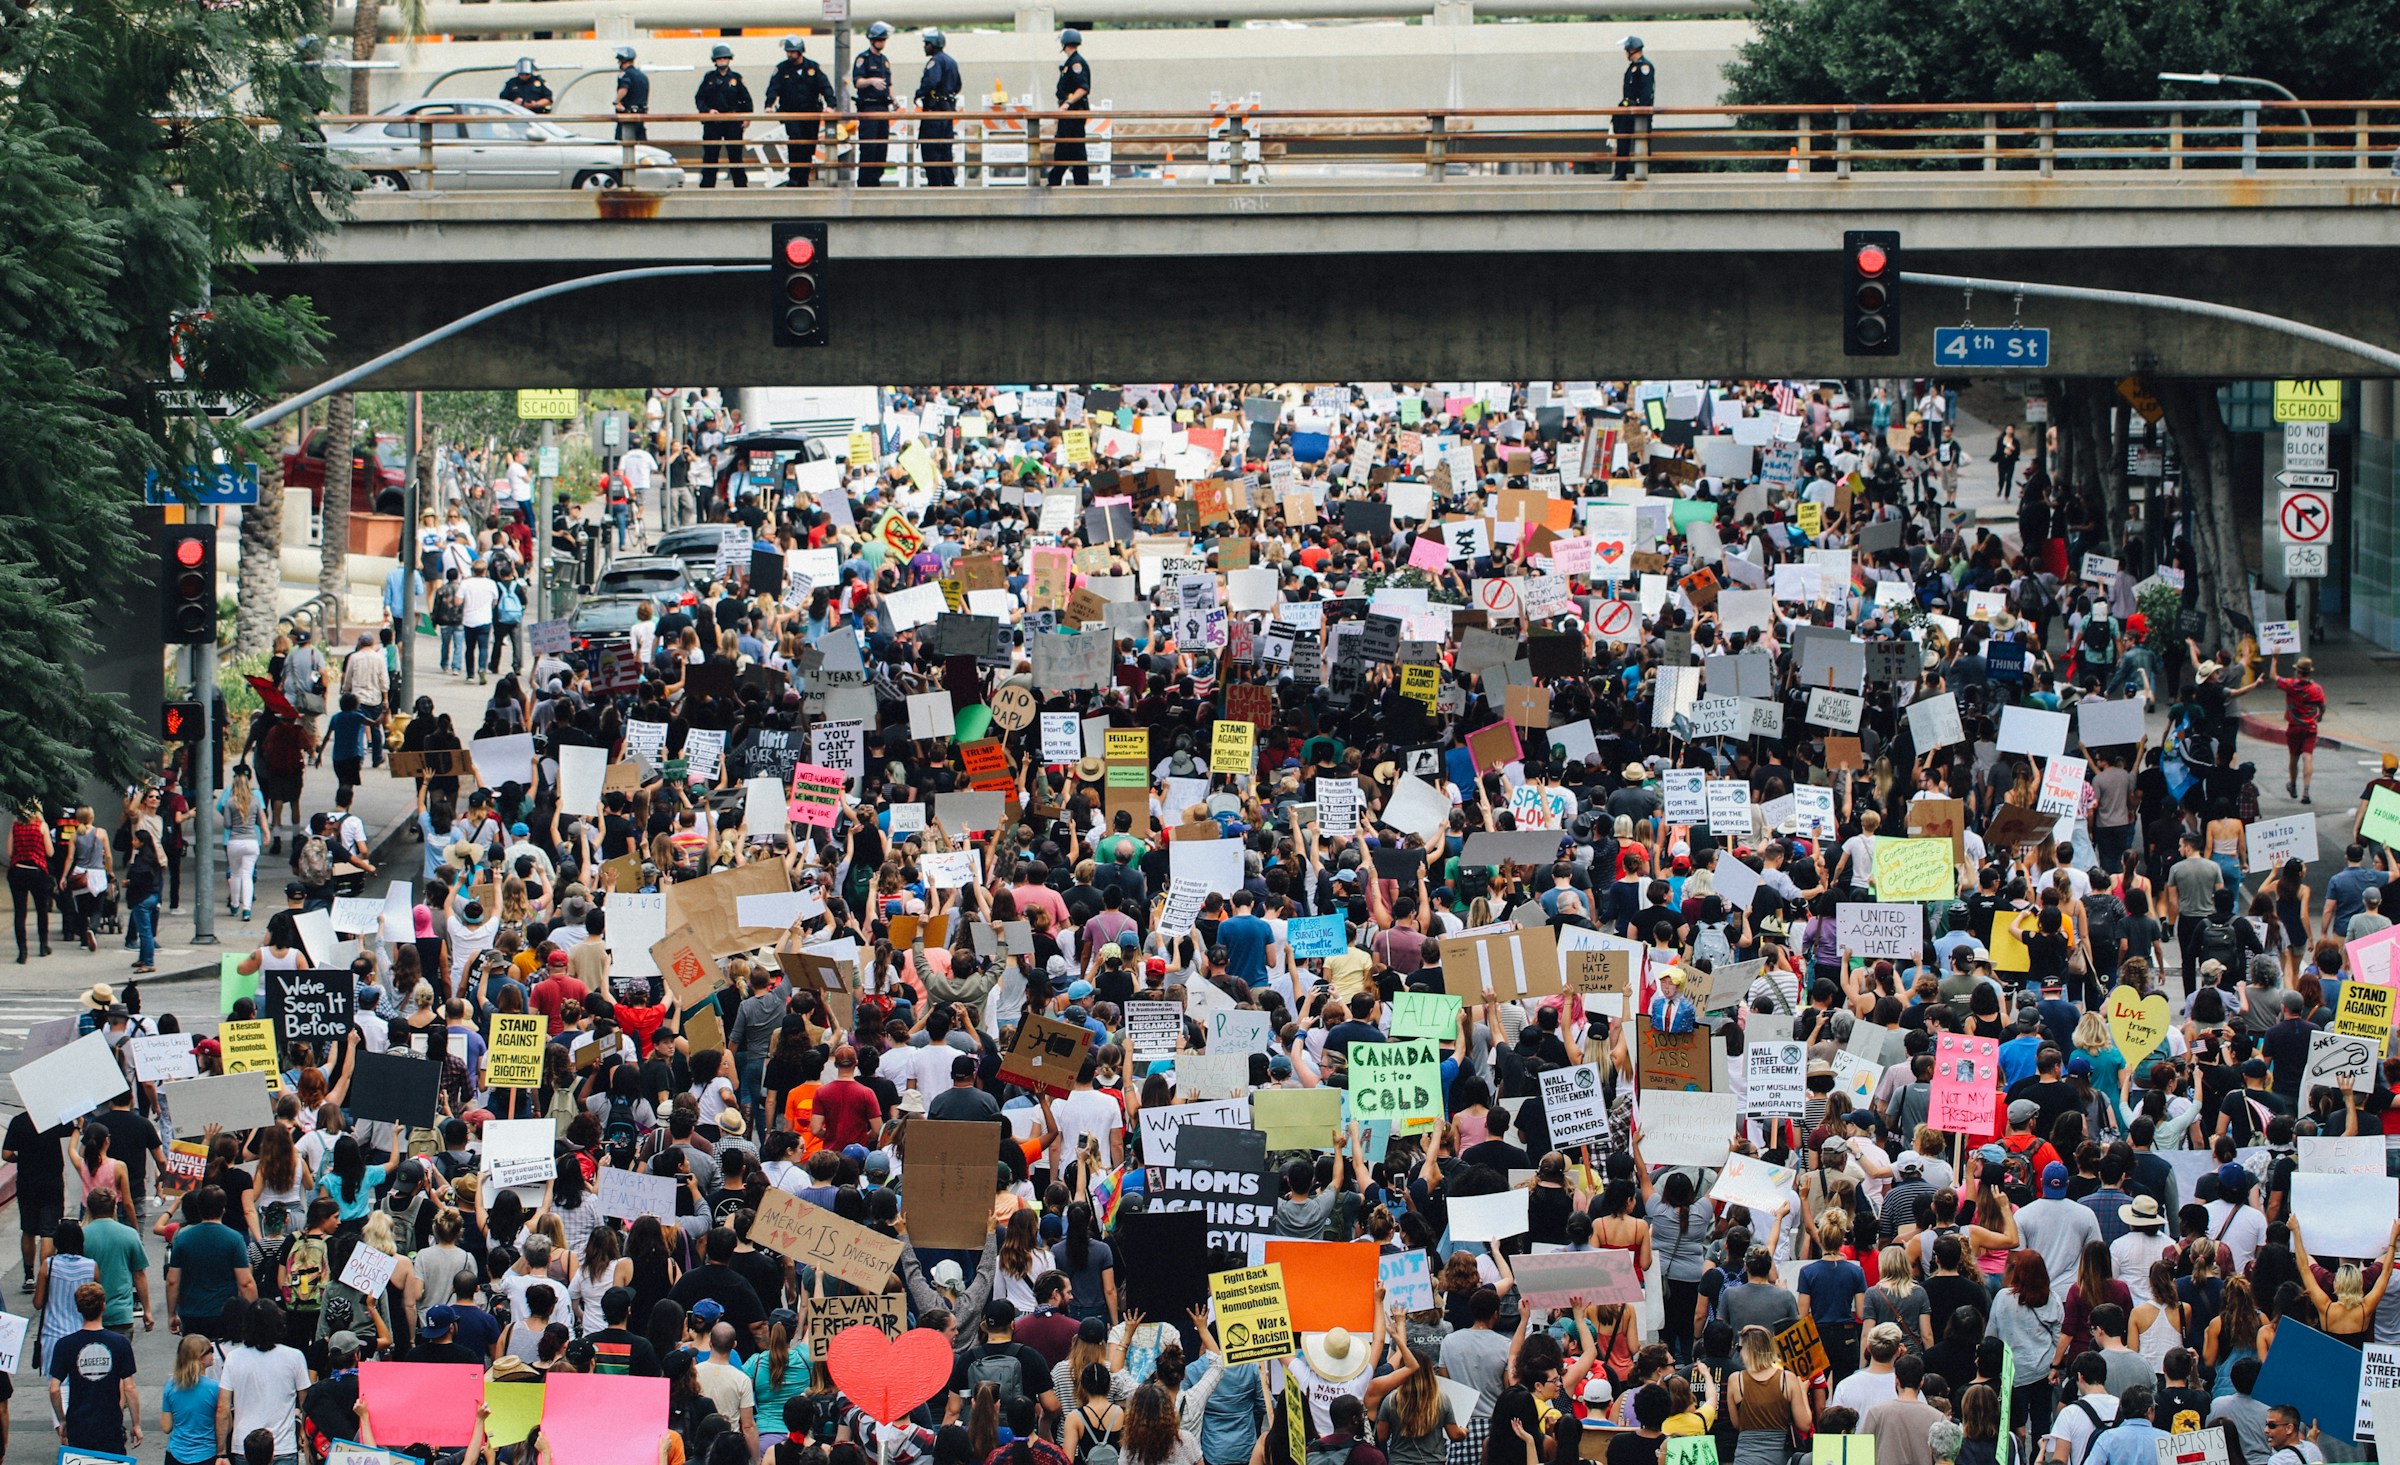 A large group of protesters holding up signs on the streets of Los Angeles, with police officers watching from a bridge above the crowd.